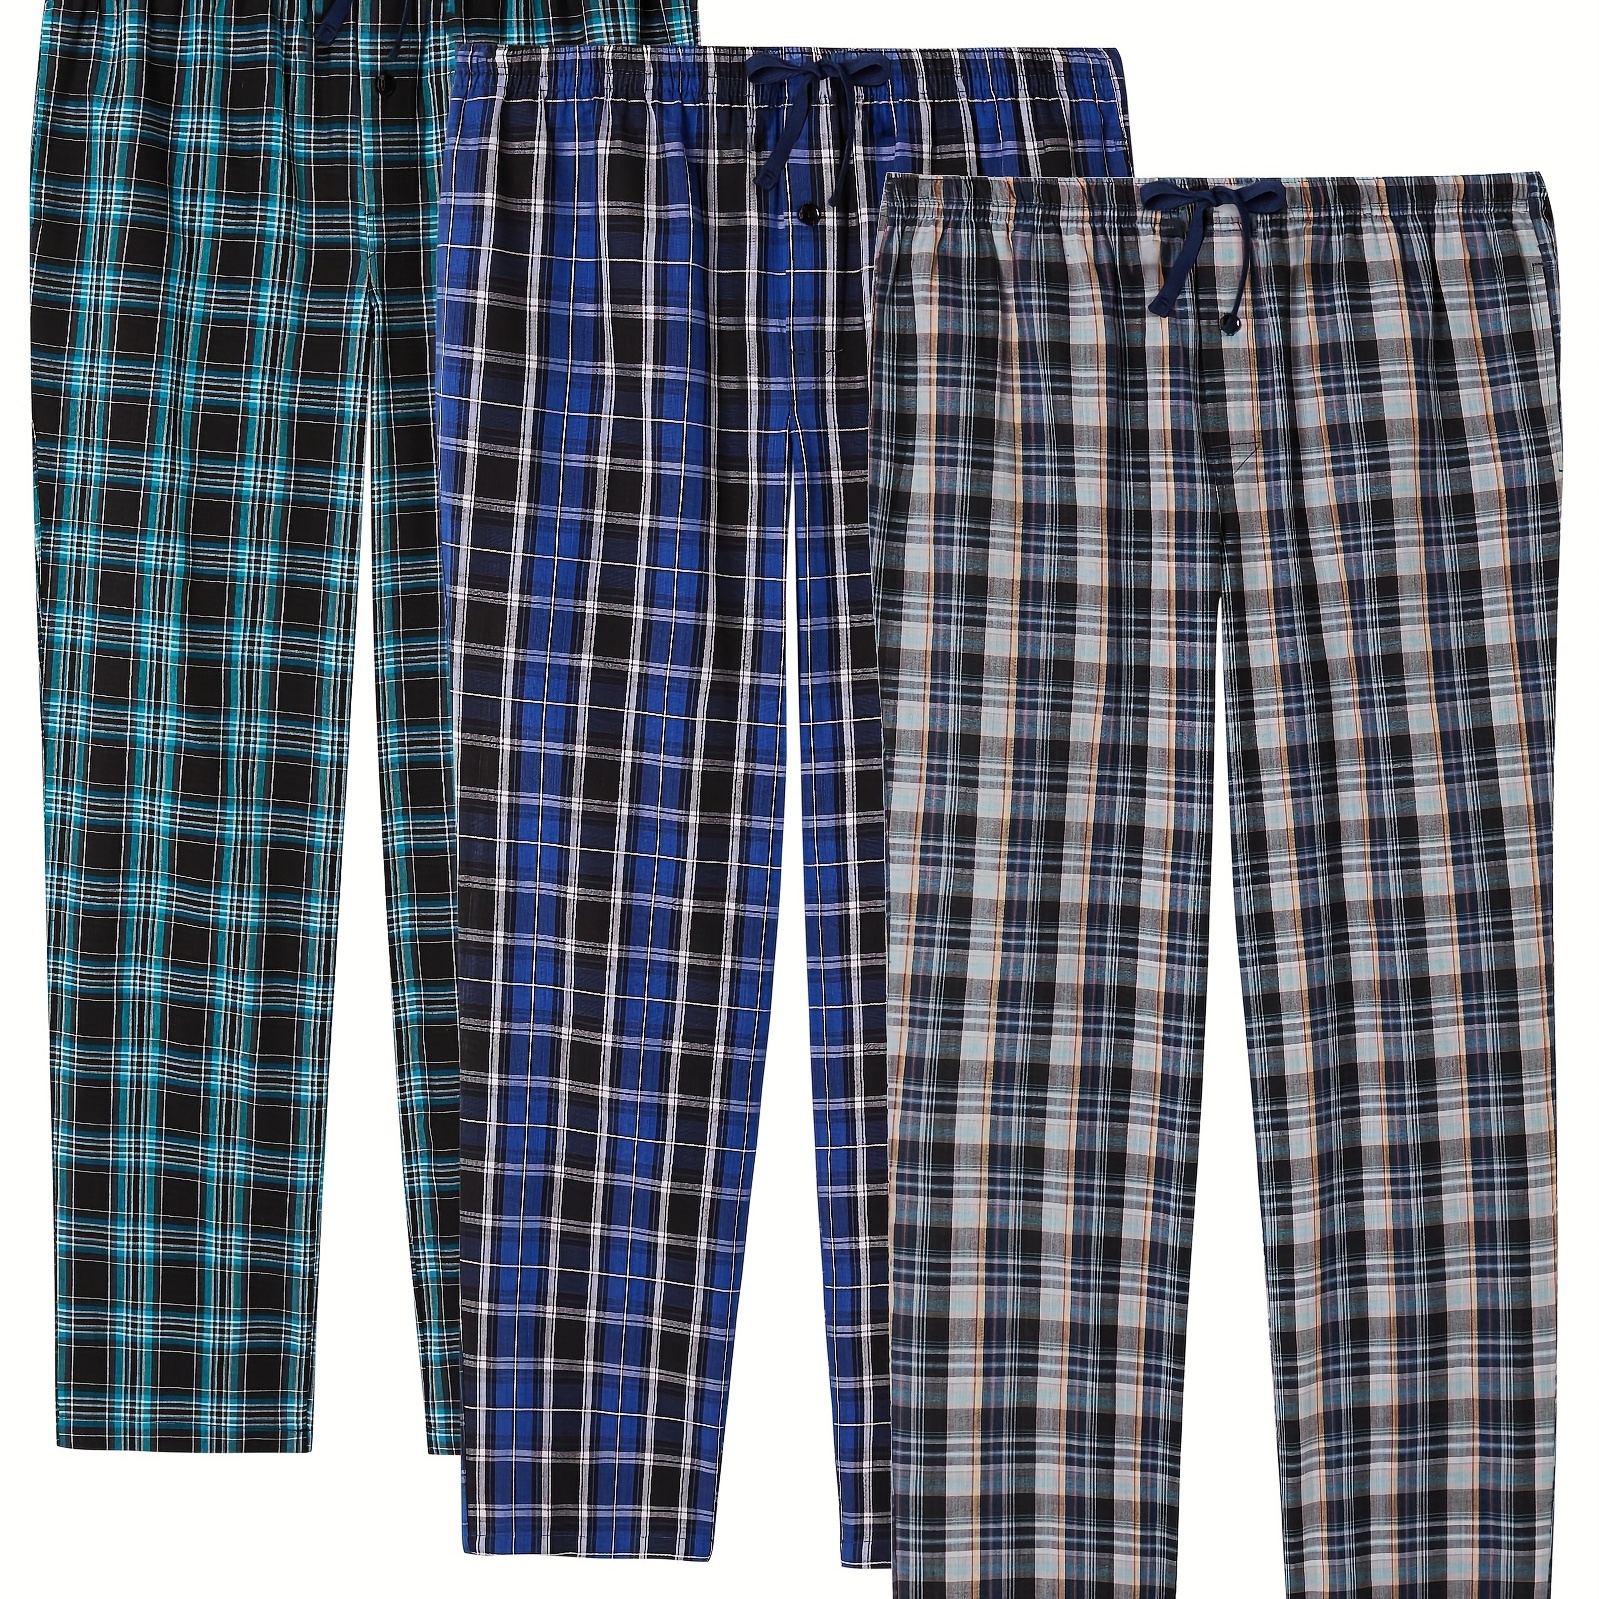 Buy JupiterSecret Mens Pajama Pants Set Flannel Cotton Plaid Sleep & Lounge  Pants, PJ Bottoms with Pockets and Button Fly, Flannel Cotton 3 Pack,  Medium at